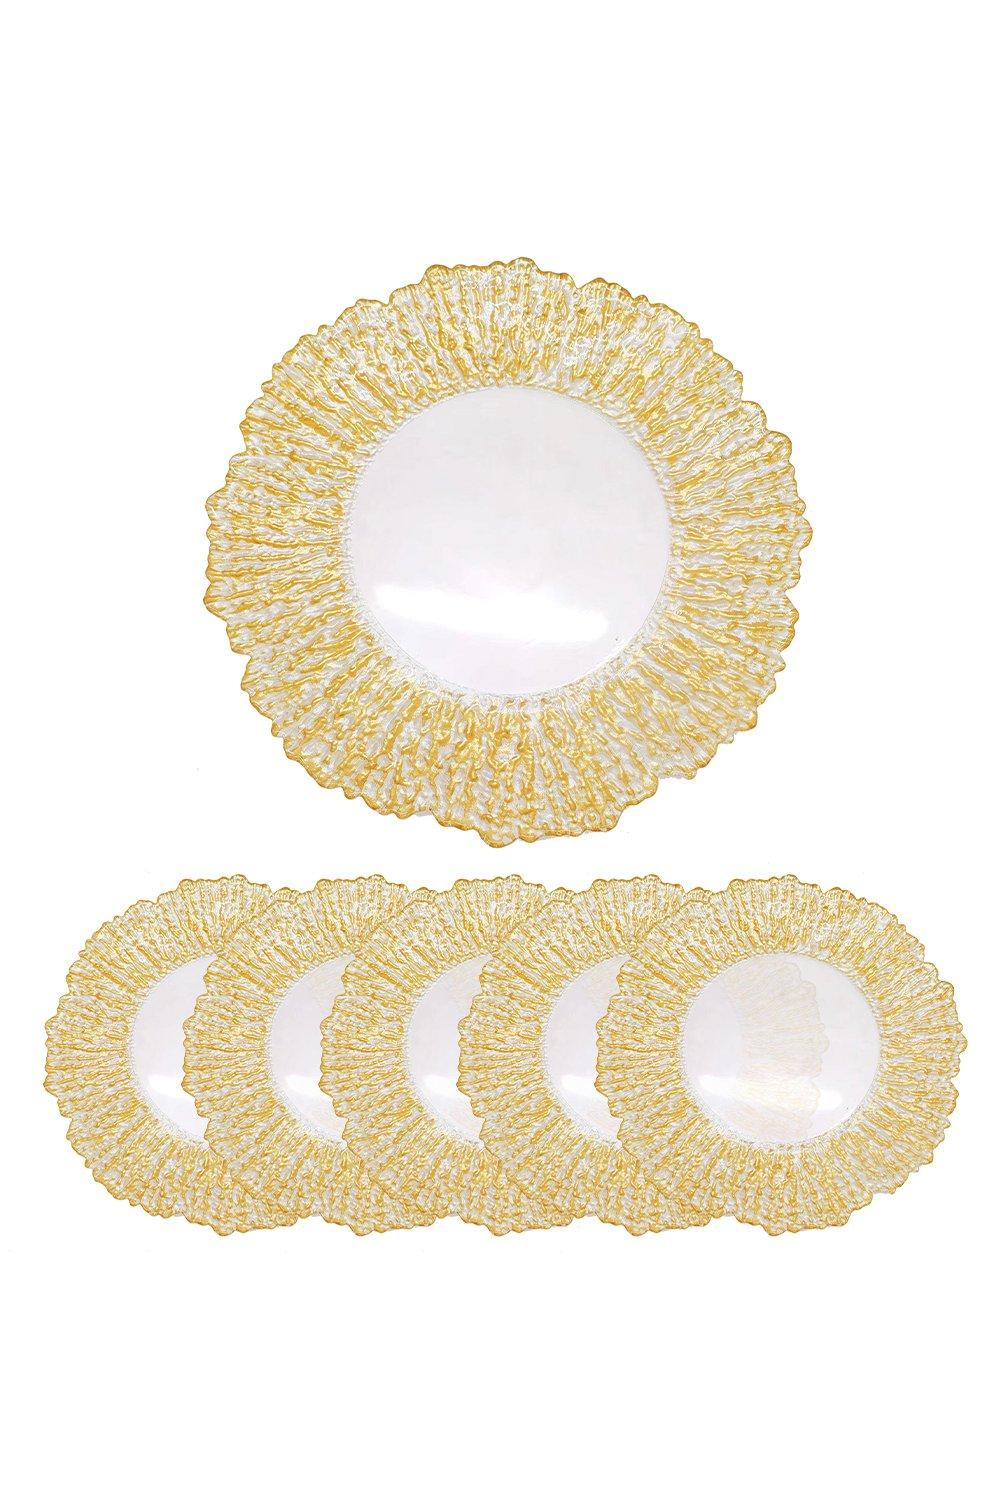 Charger Plates for Table Decoration - Pack of 6